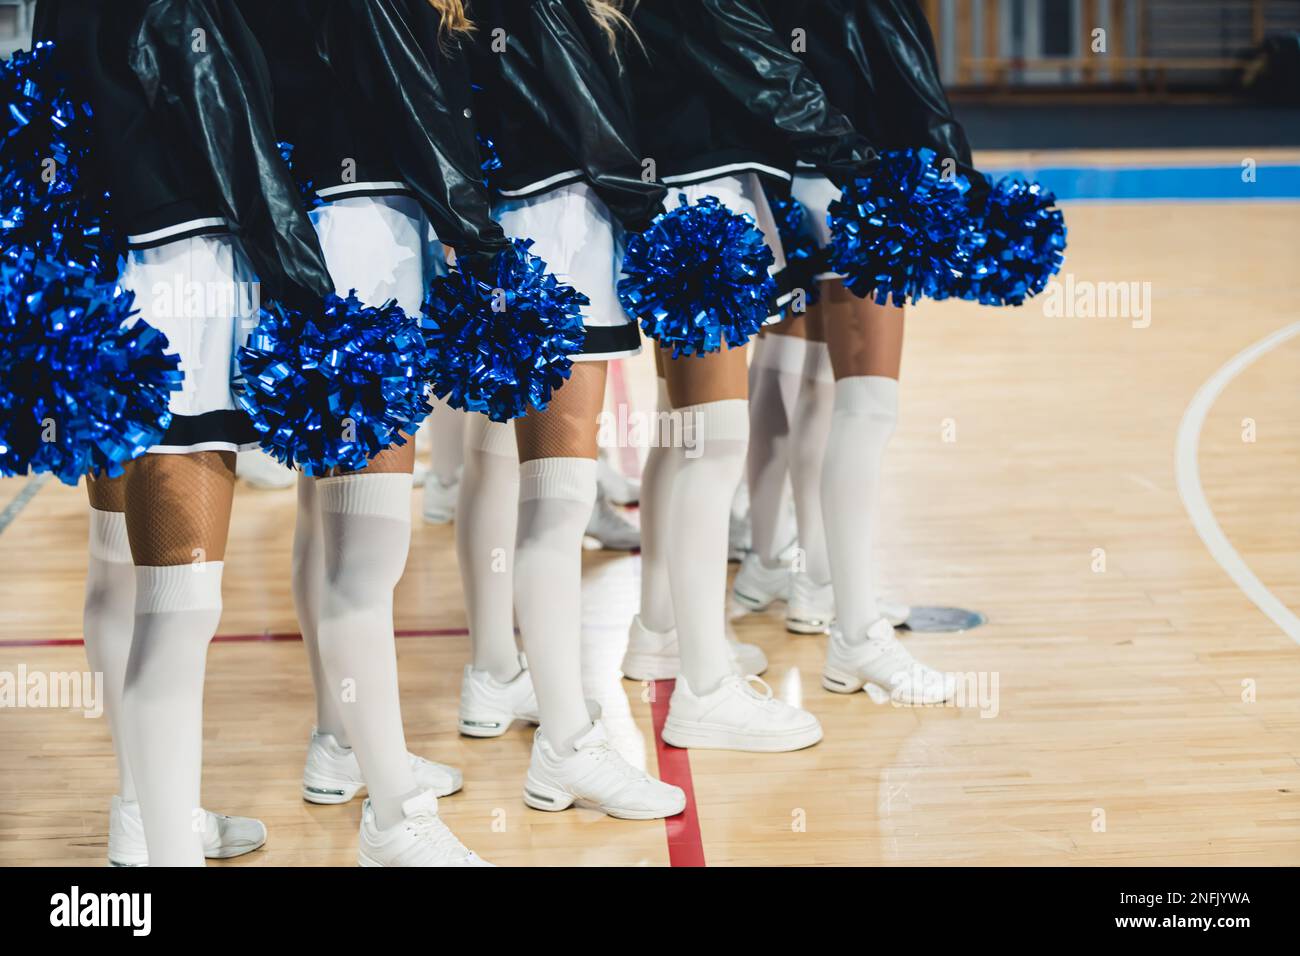 cheerleaders wearing white sneakers, tights, skirts, black jackets and blue  pom-poms, arena. High quality photo Stock Photo - Alamy